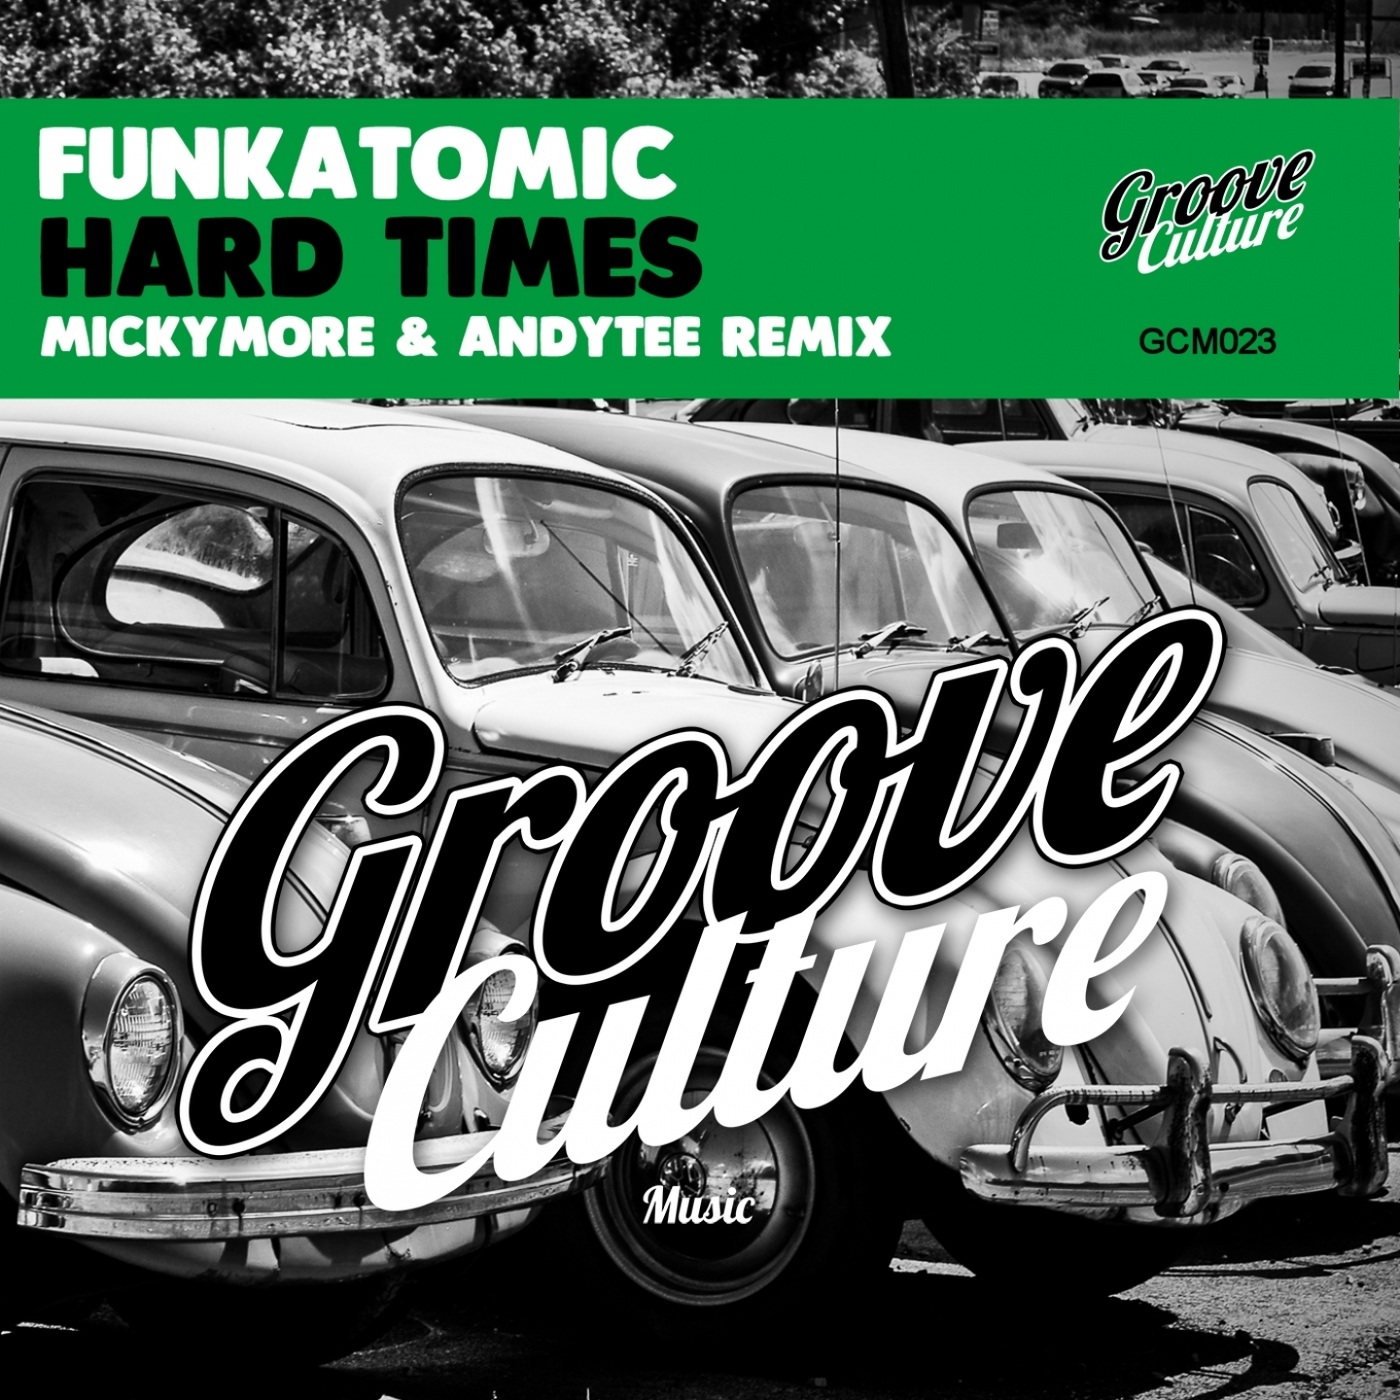 Funkatomic - Hard Times (Micky More & Andy Tee Remix) / Groove Culture